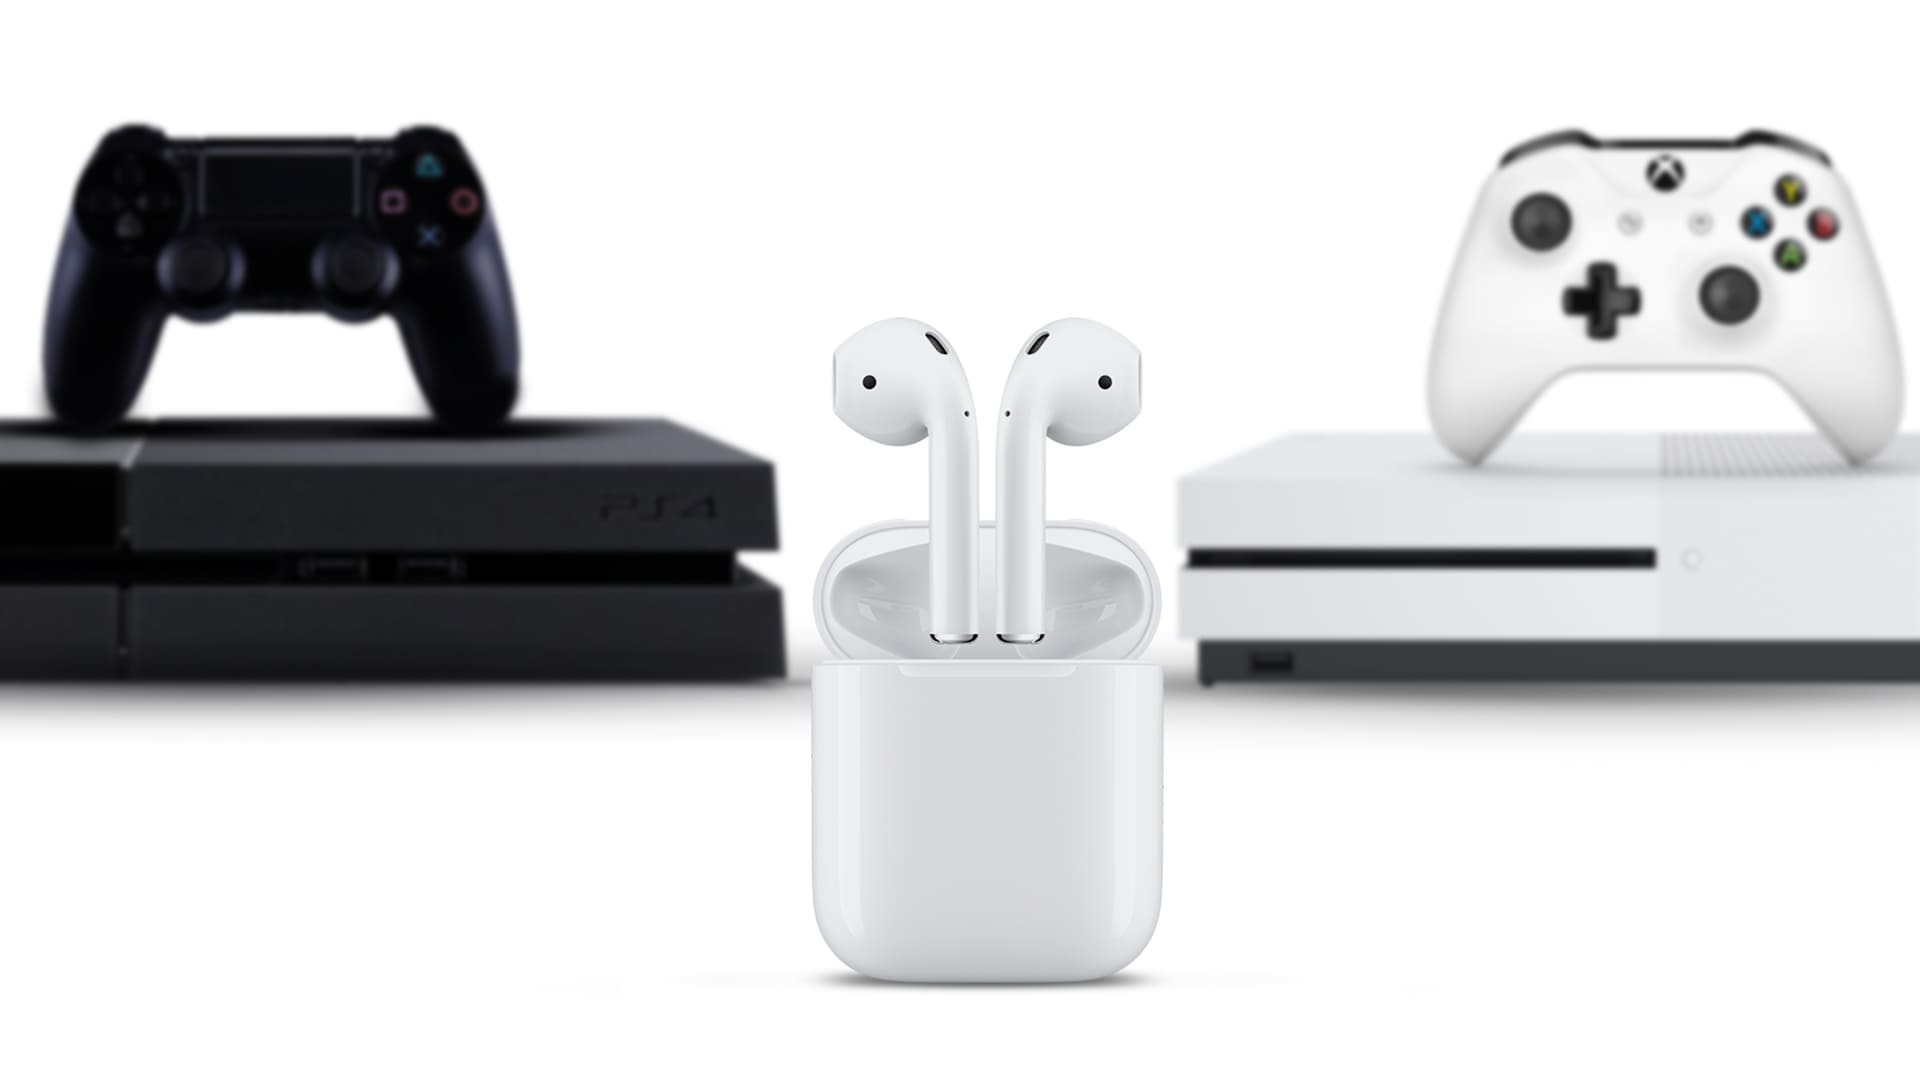 How to connect AirPods Pro to PS4 or PS4 Pro? Pairing AirPods Pro with - FAQ from topheadphone.desigusxpro.com/en/